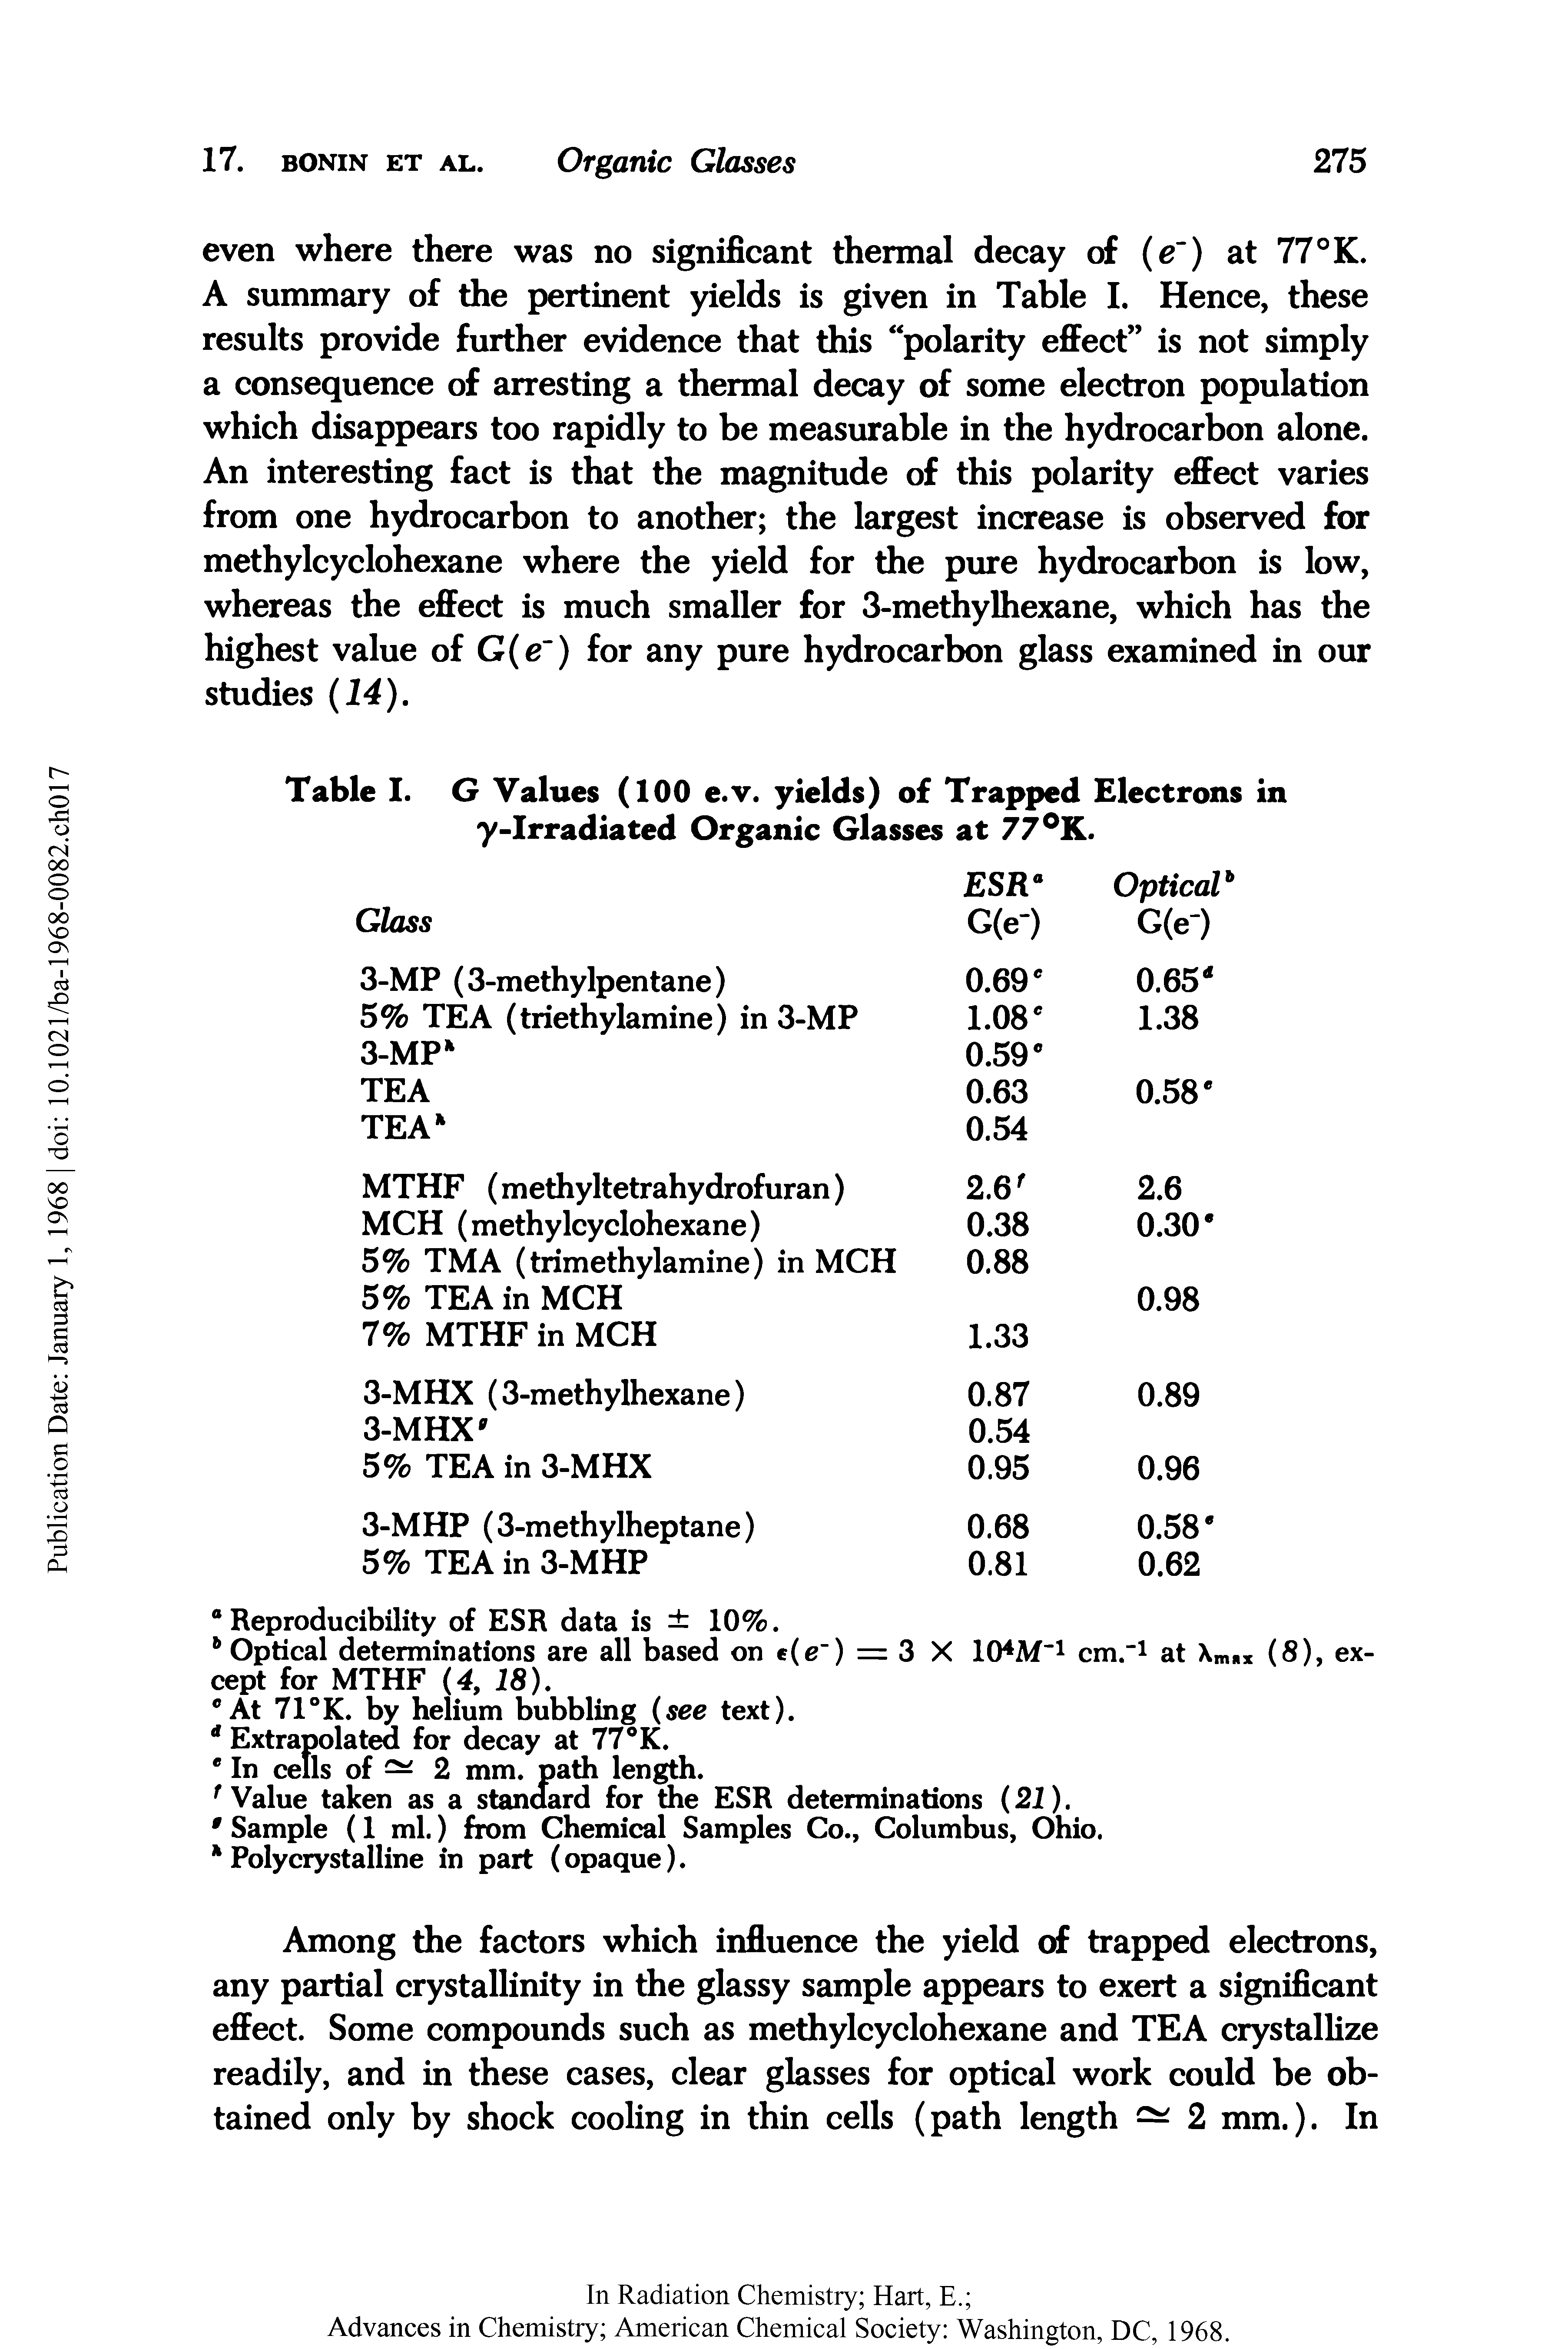 Table I. G Values (100 e.v. yields) of Trapped Electrons in y-Irradiated Organic Glasses at 77 °K.